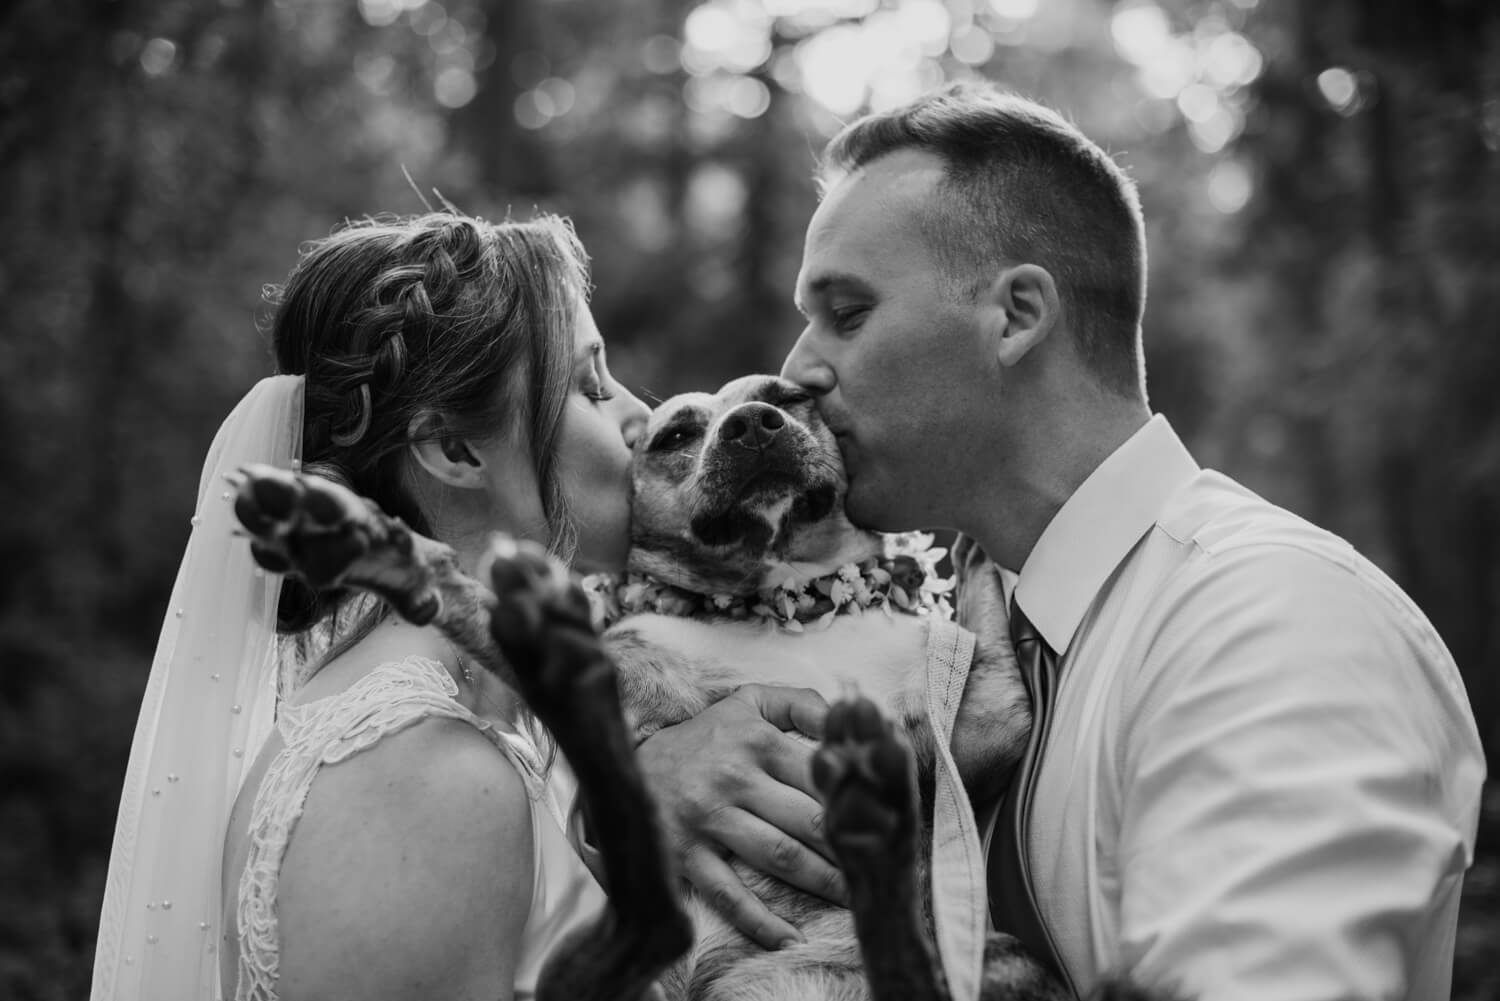 The bride and groom give their dog a big kiss